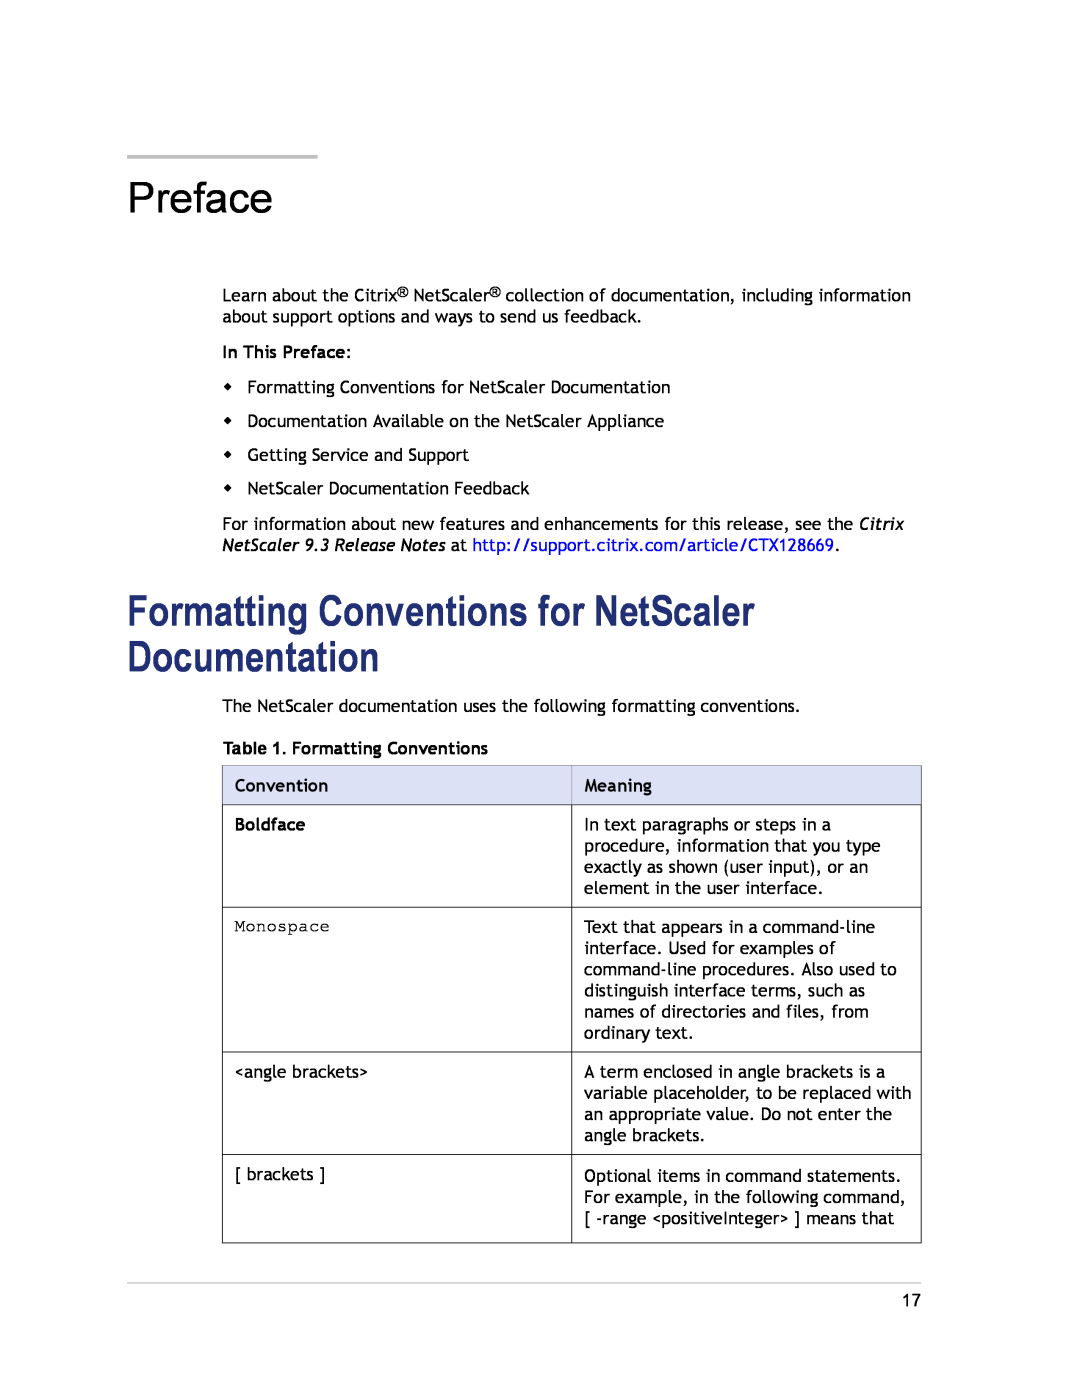 Citrix Systems CITRIX NETSCALER 9.3 manual Formatting Conventions for NetScaler Documentation, In This Preface, Meaning 